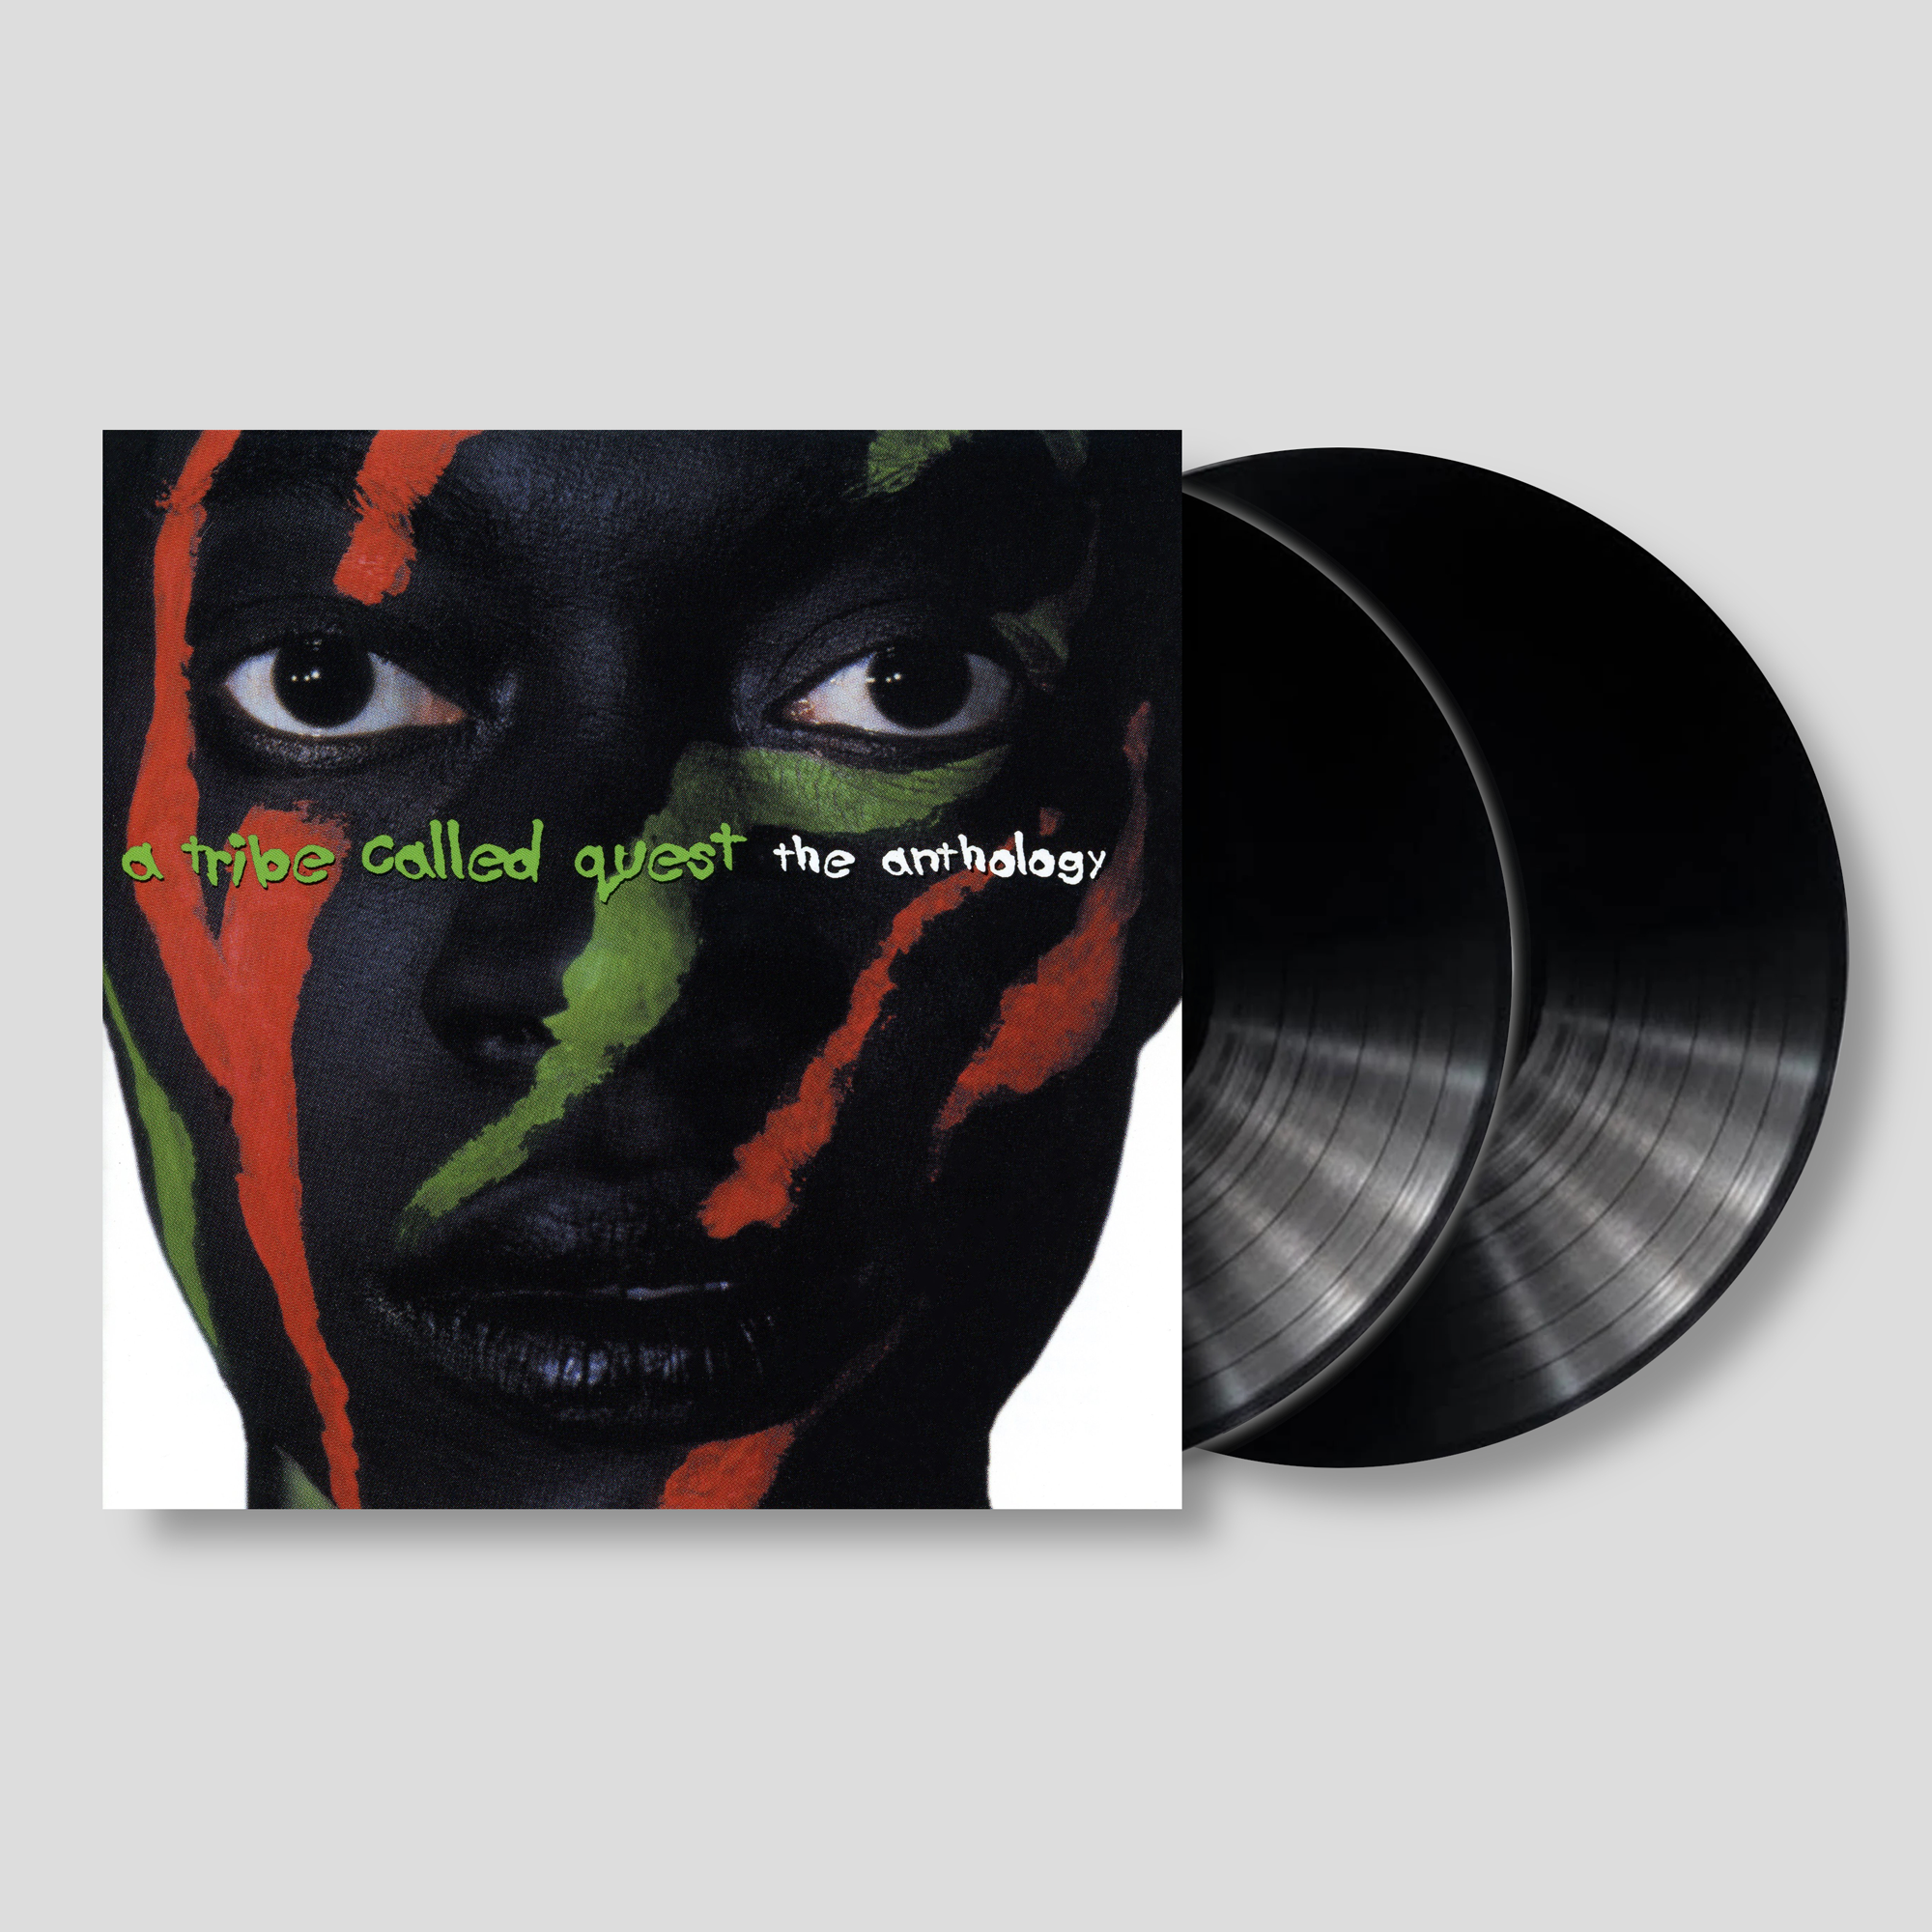 A Tribe Called Quest - The Anthology: Vinyl 2LP